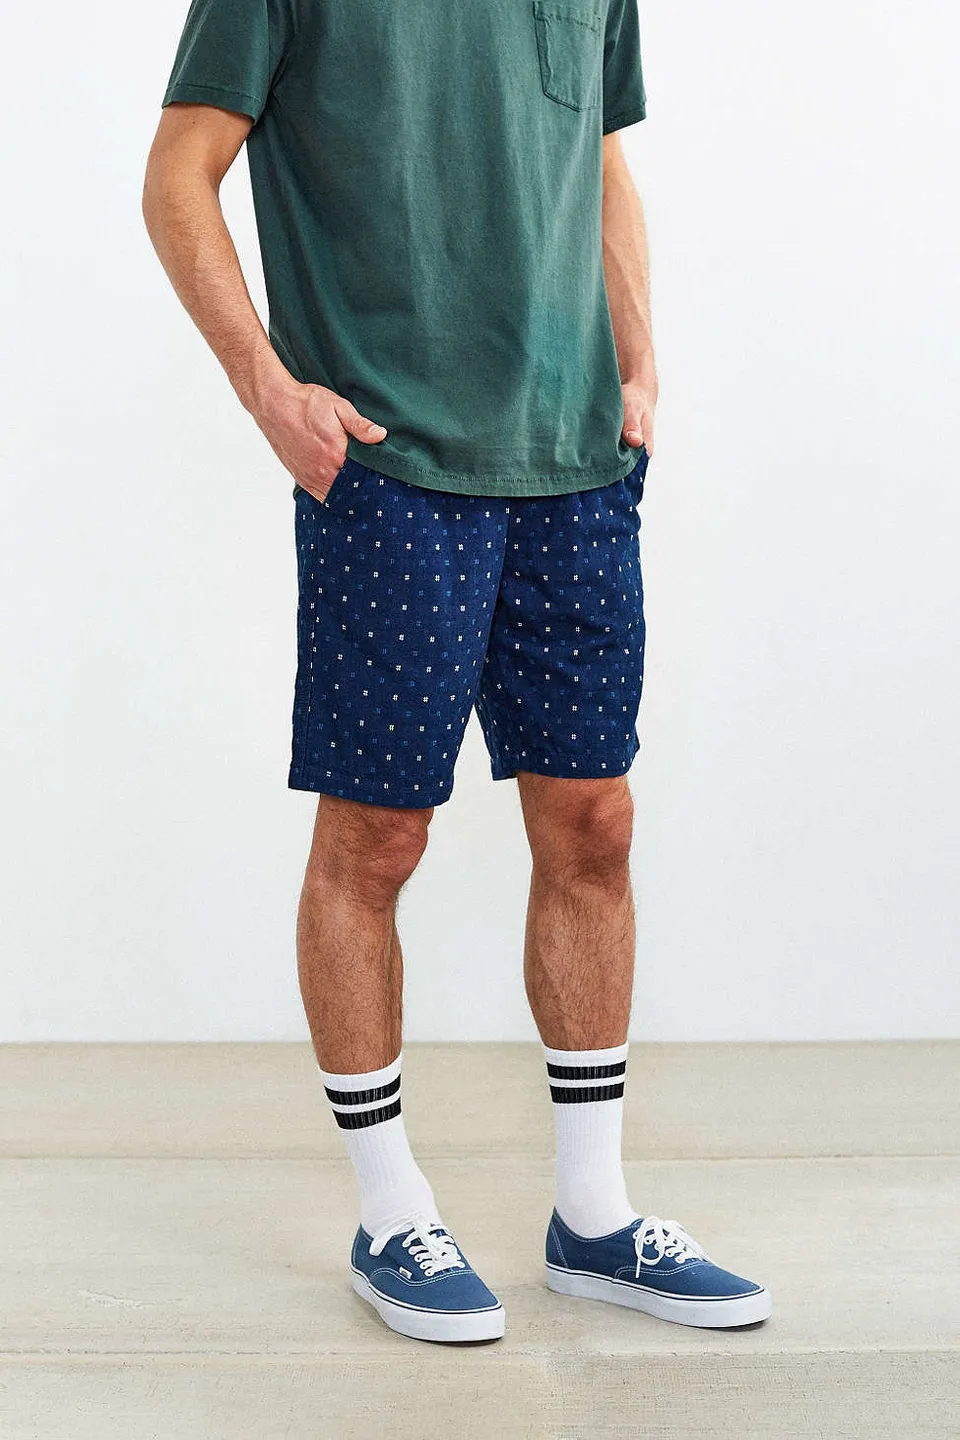 How To Wear Crew Socks With Shorts | vlr.eng.br